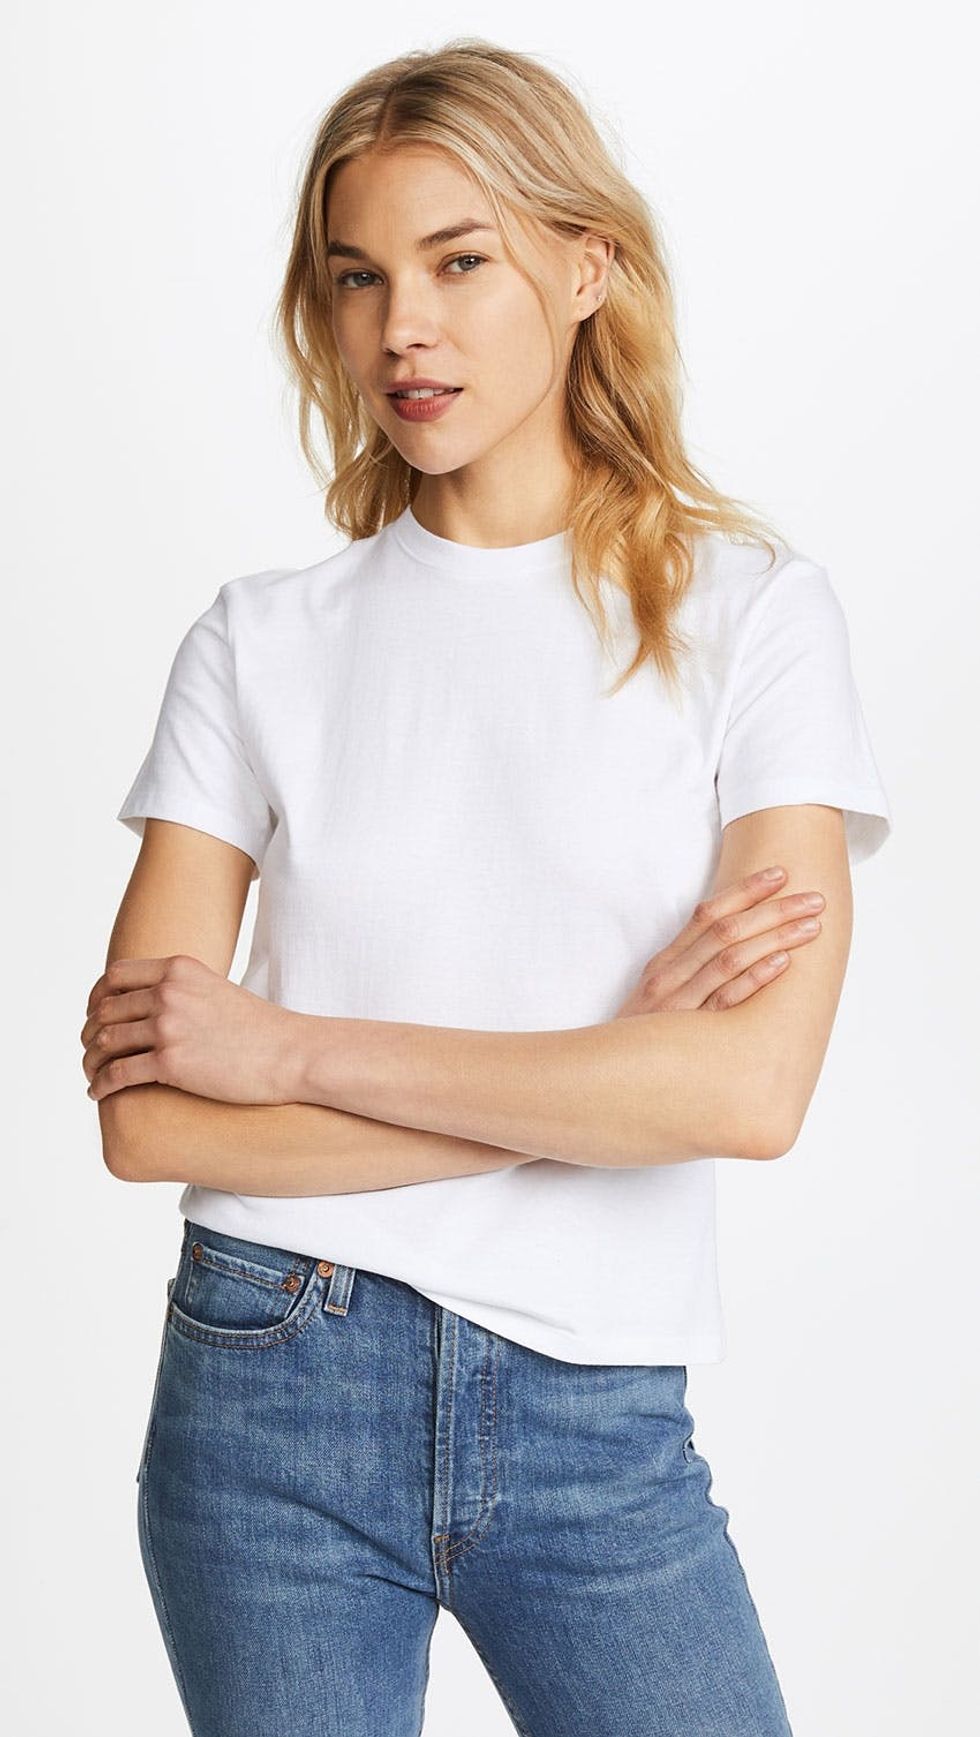 9 Perfect White T-Shirts That Totally Complete Your Outfit - Brit + Co